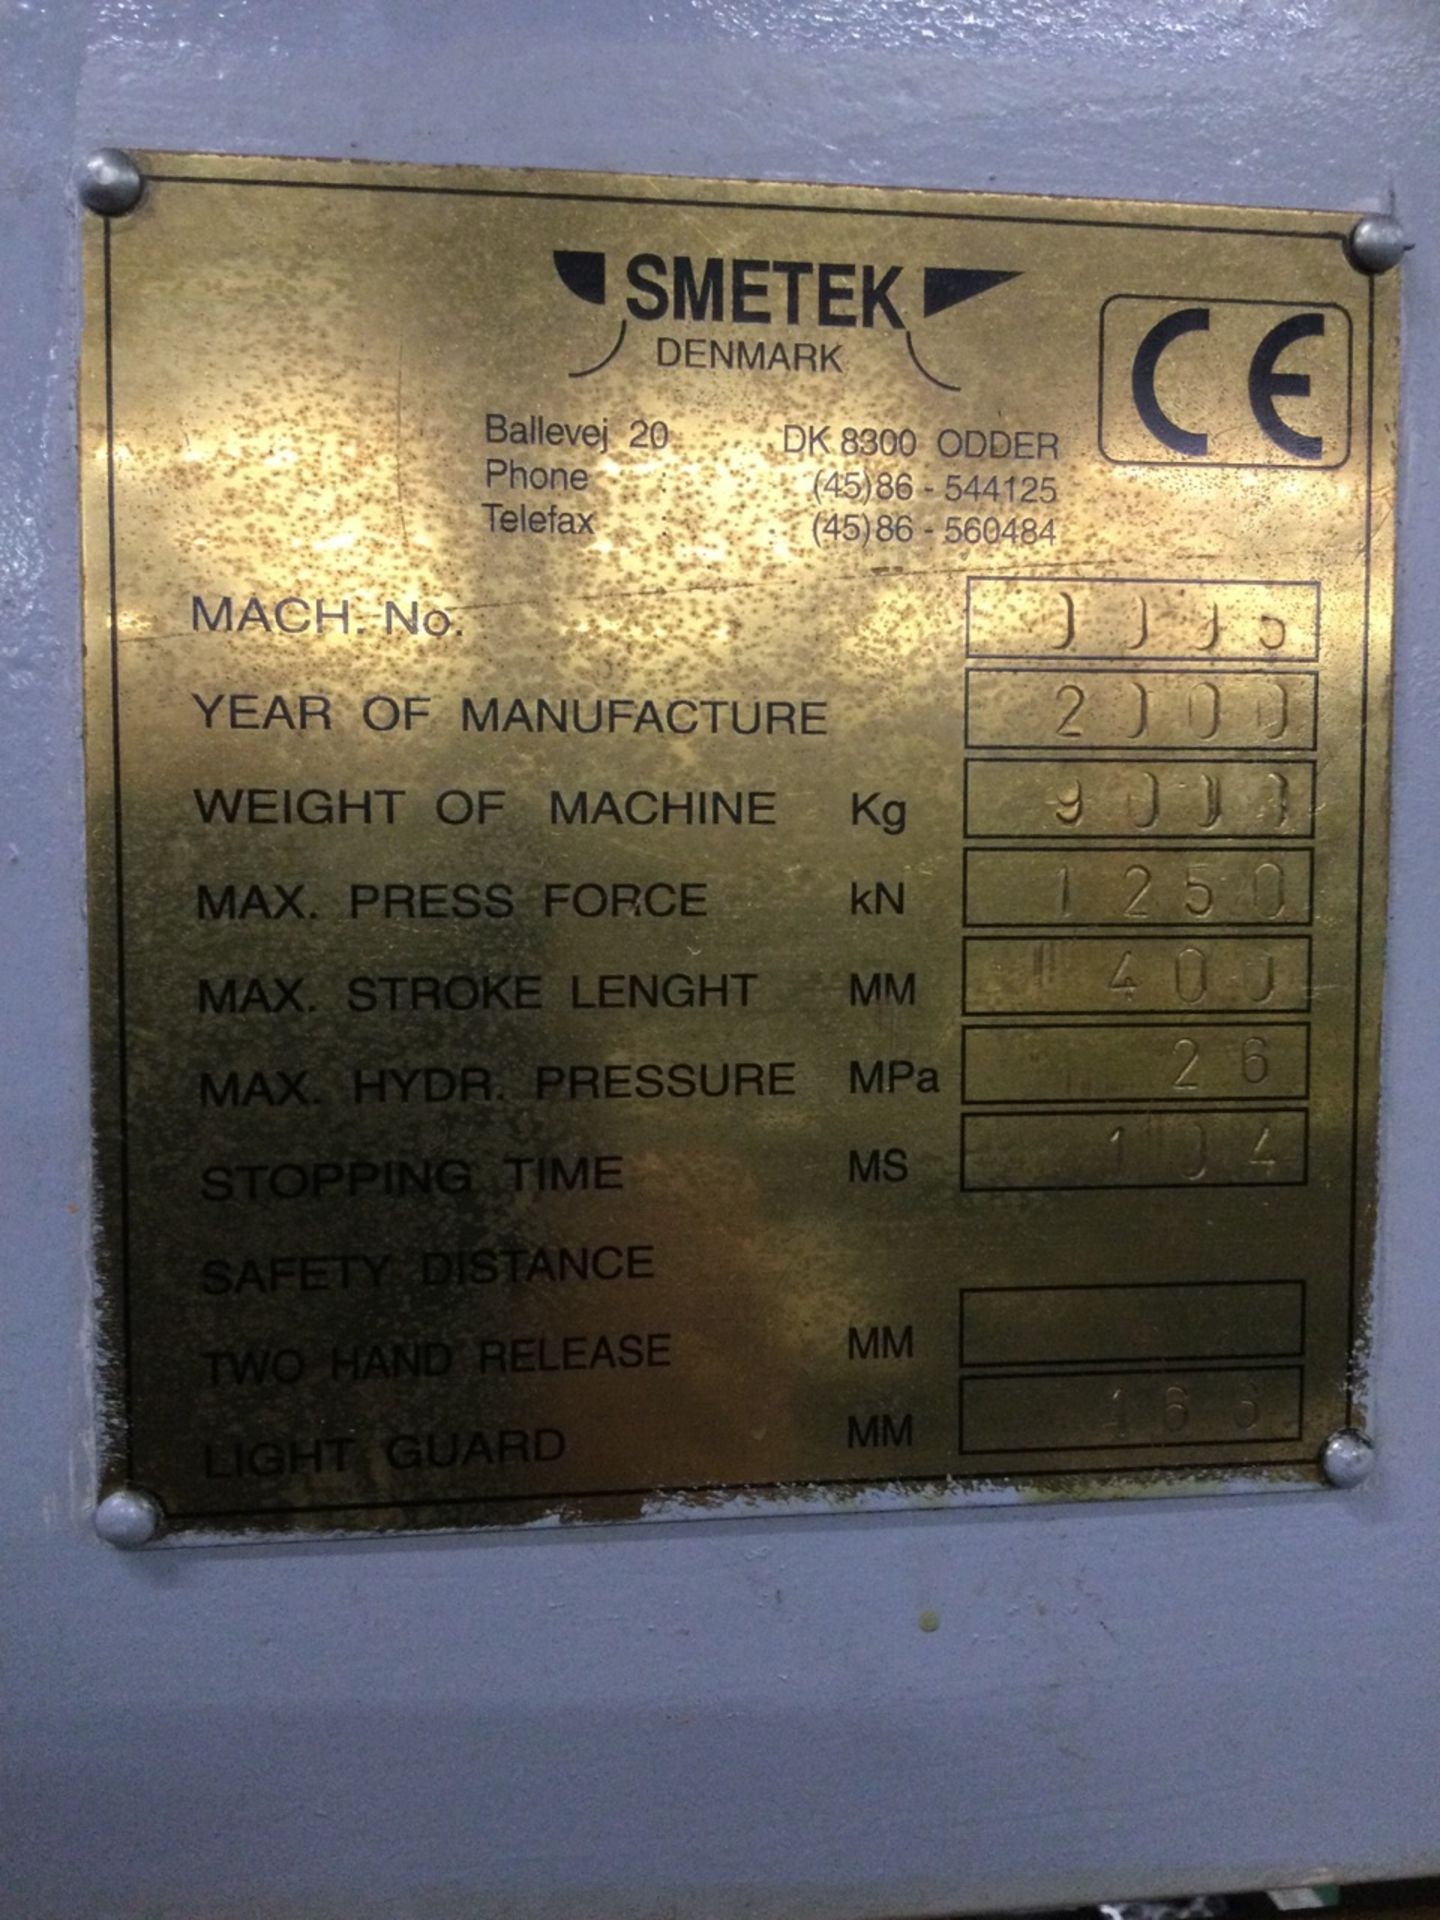 1 Smetek, 125-ton hydraulic power press, bed size 1000x600mm , Serial Number: 0005, Year of Manufact - Image 4 of 4